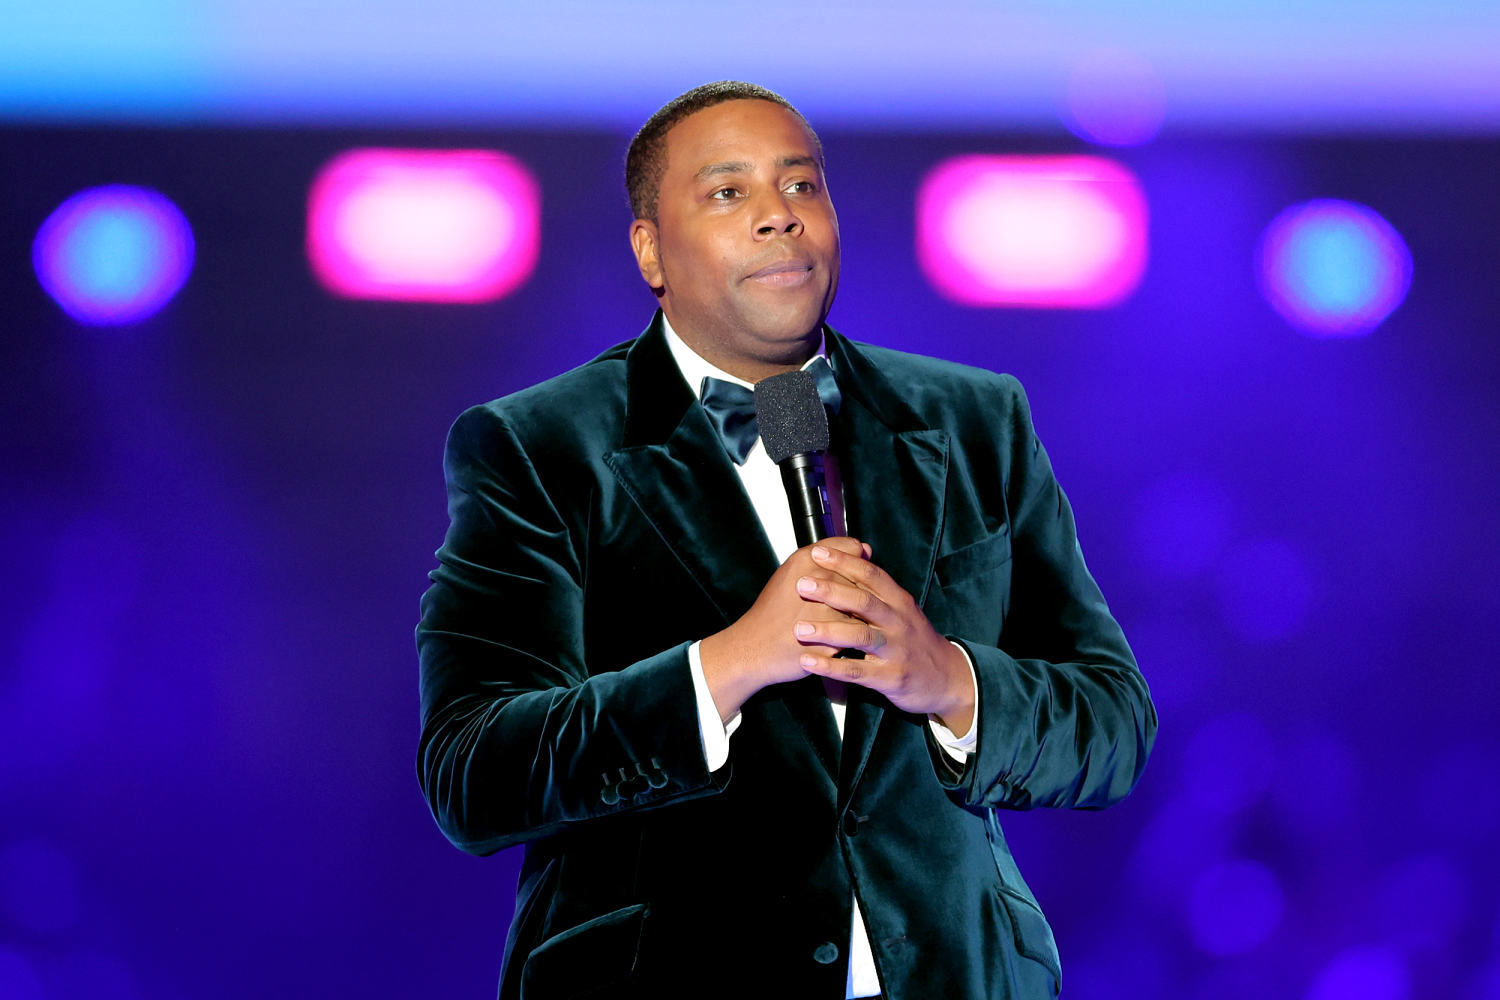 Kenan Thompson says ‘heart goes out’ to fellow Nickelodeon stars featured in ‘Quiet on Set’